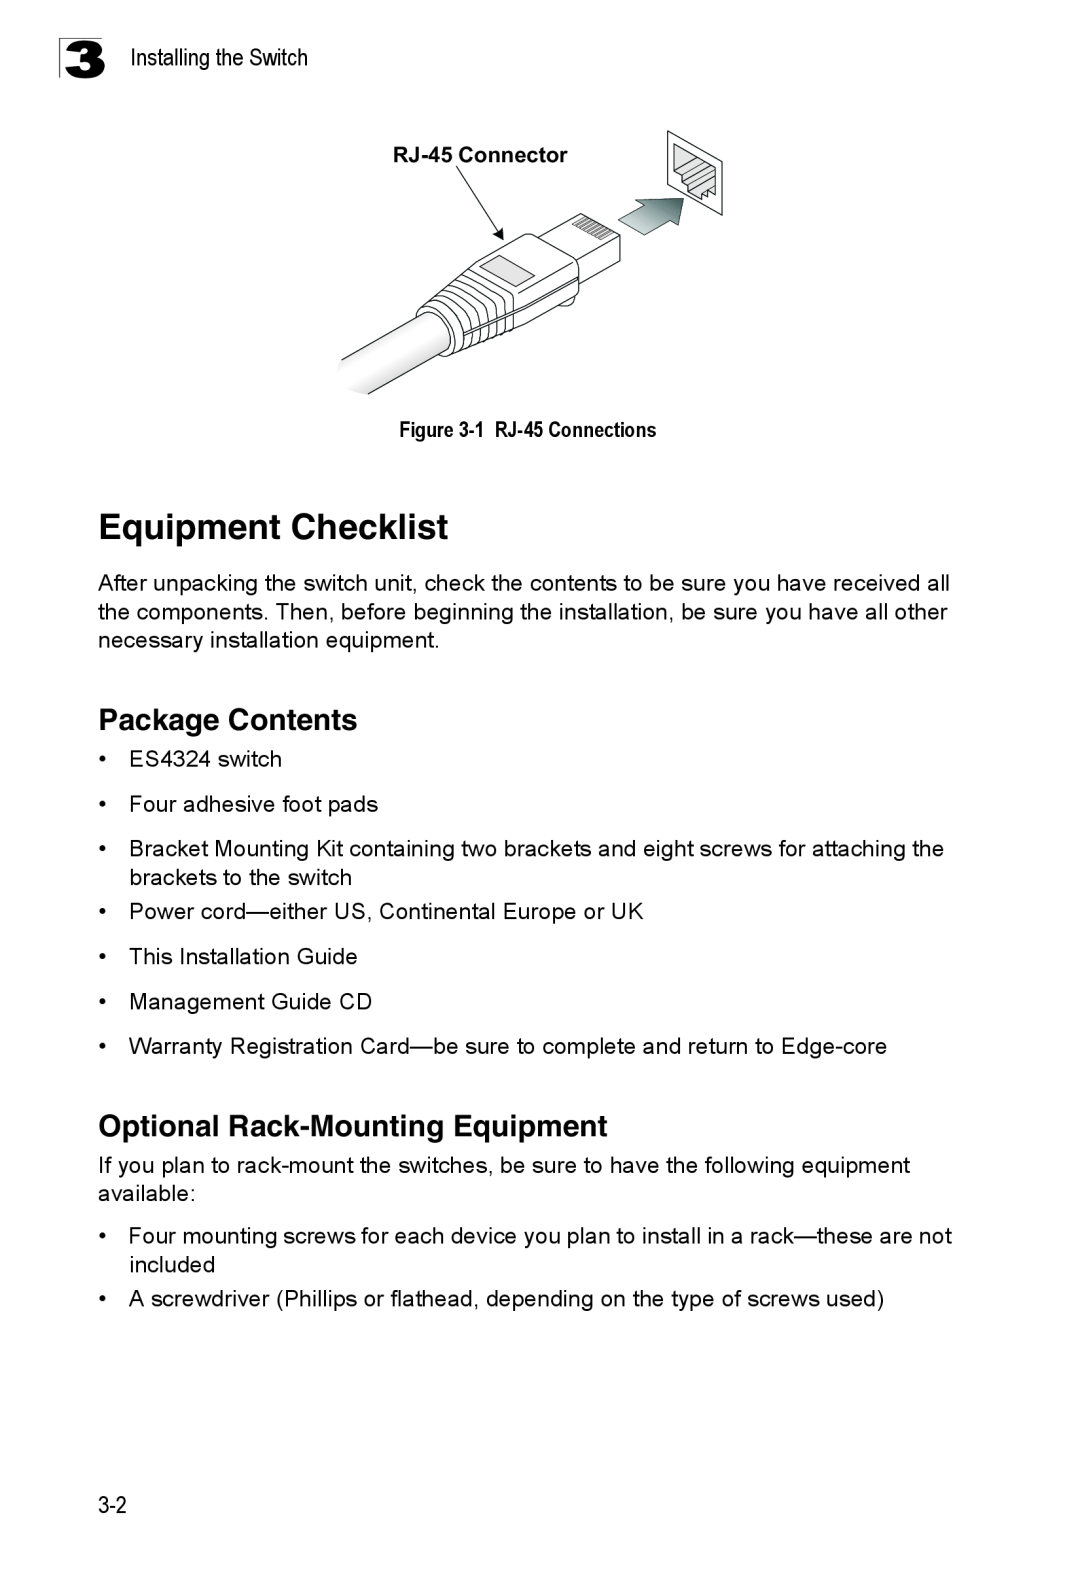 Accton Technology ES4324 manual Equipment Checklist, Package Contents, Optional Rack-Mounting Equipment 